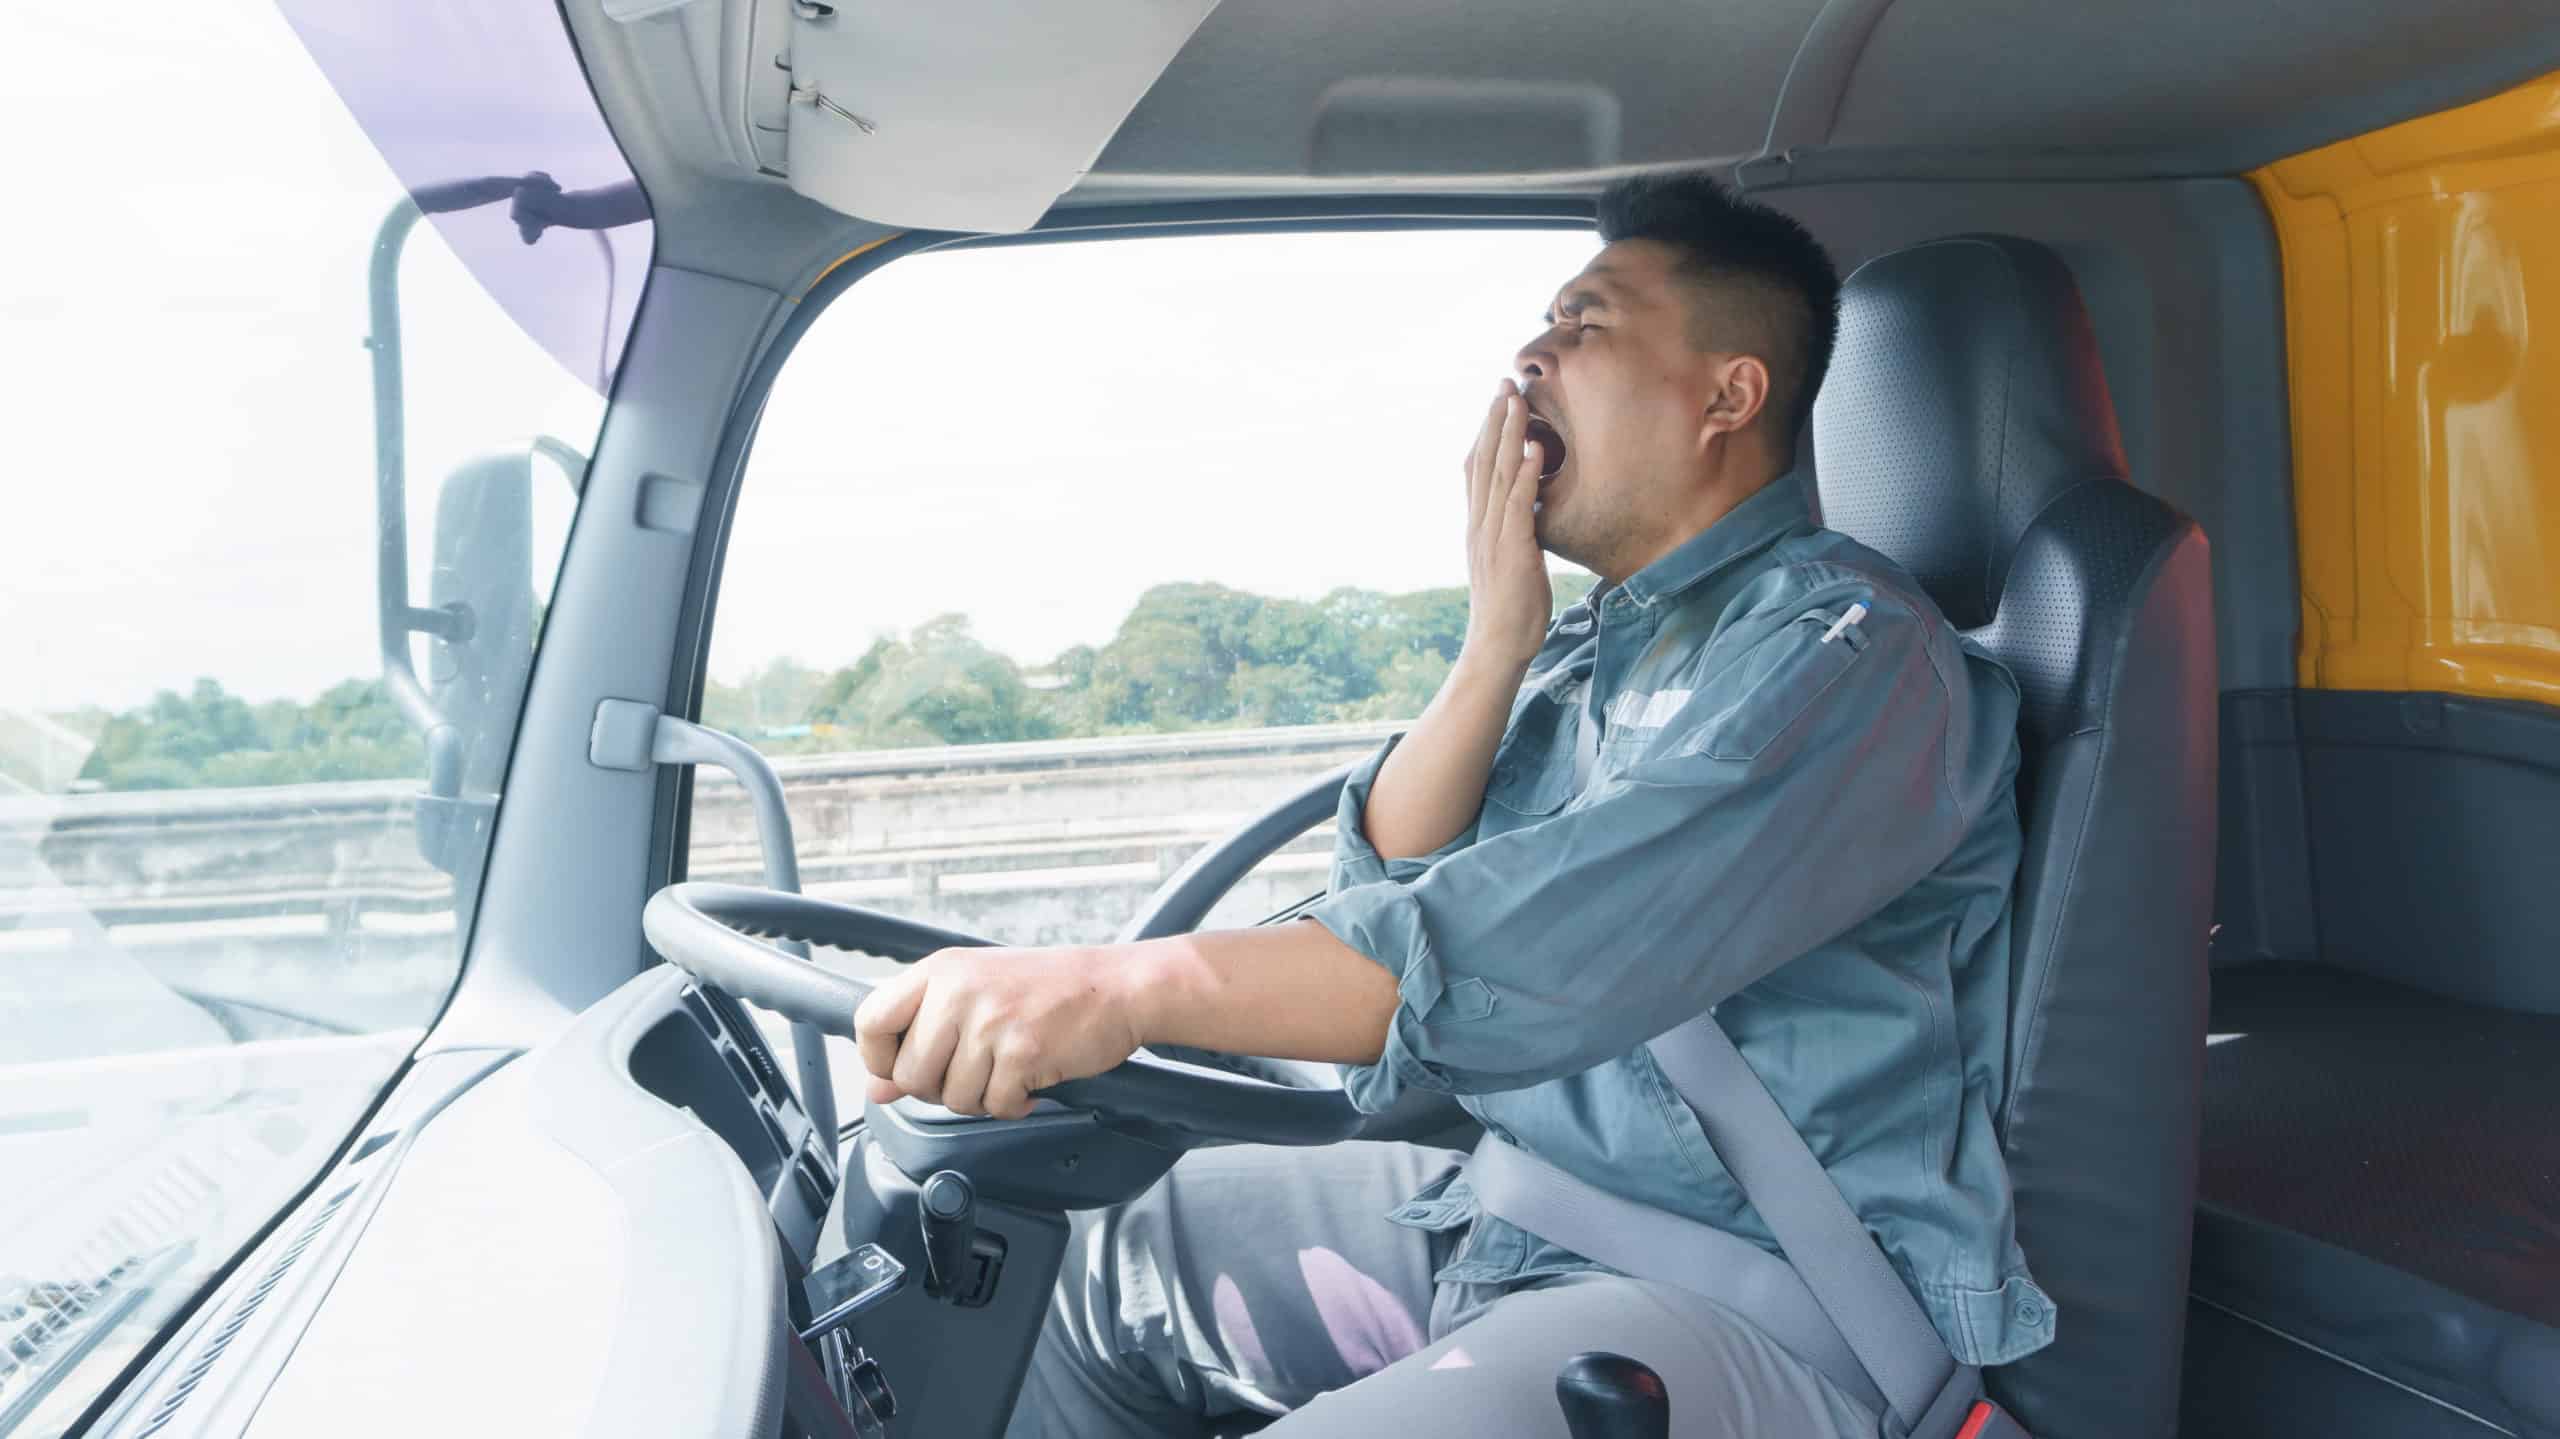 Truck Accident Lawyer for Crashes Caused by Fatigued Driver - Wilshire Law Firm
